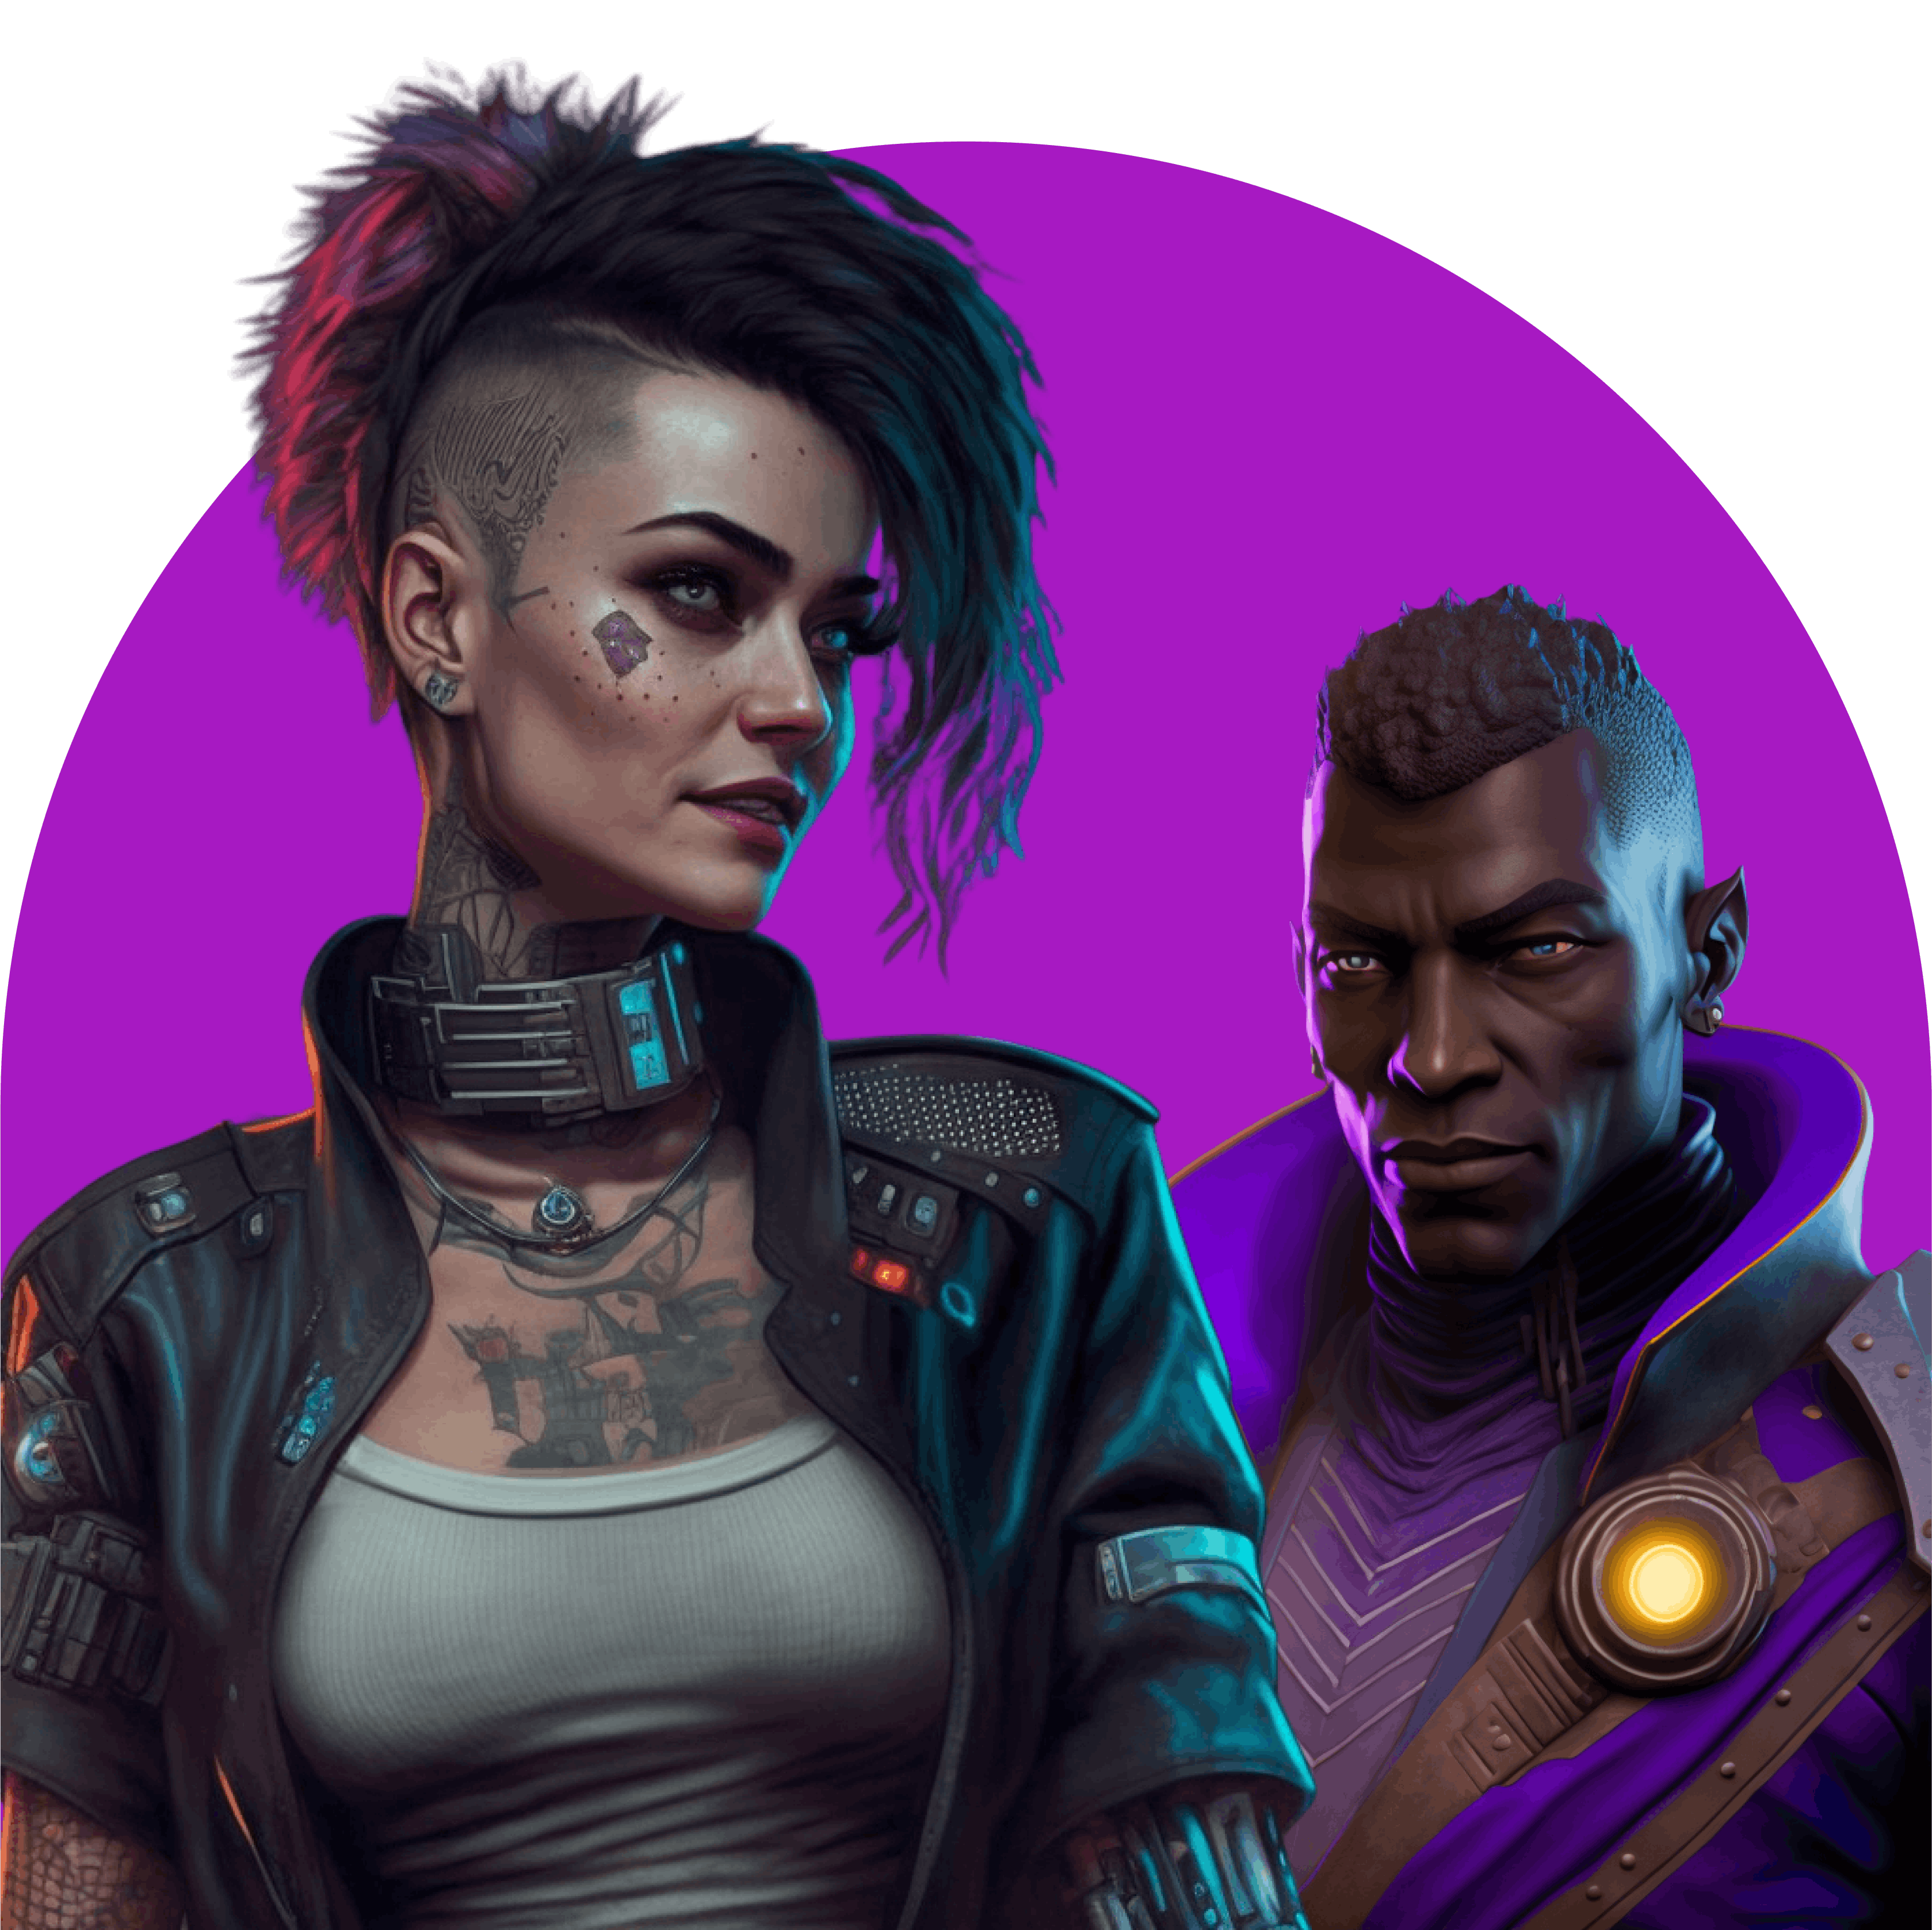 On a purple background there's a futuristic looking NPC with tattoos and an undercut and a space captain NPC in purple and gold. 